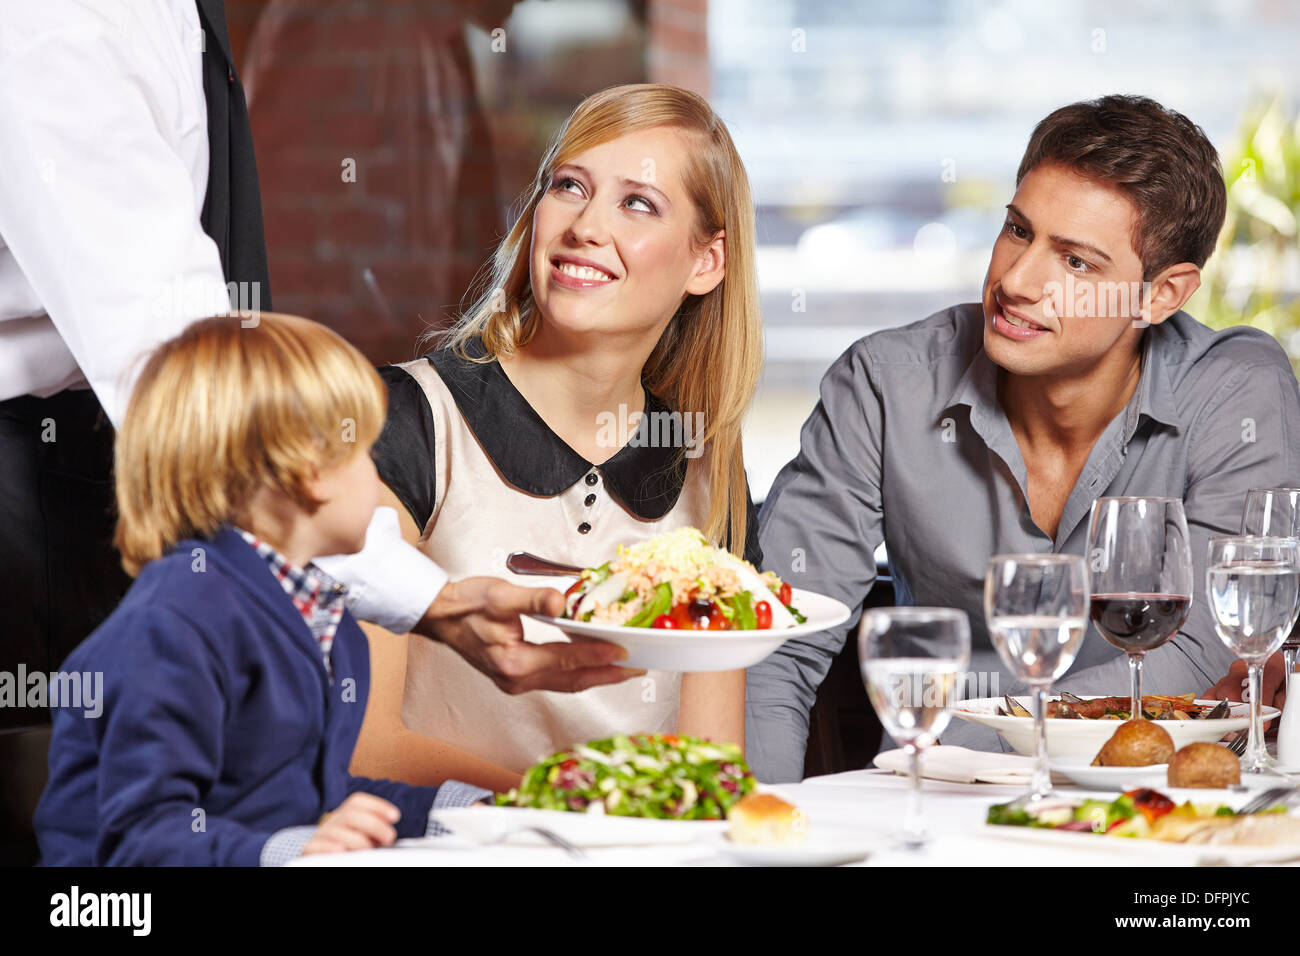 Waiter serving a family in a restaurant and bringing a full plate Stock Photo